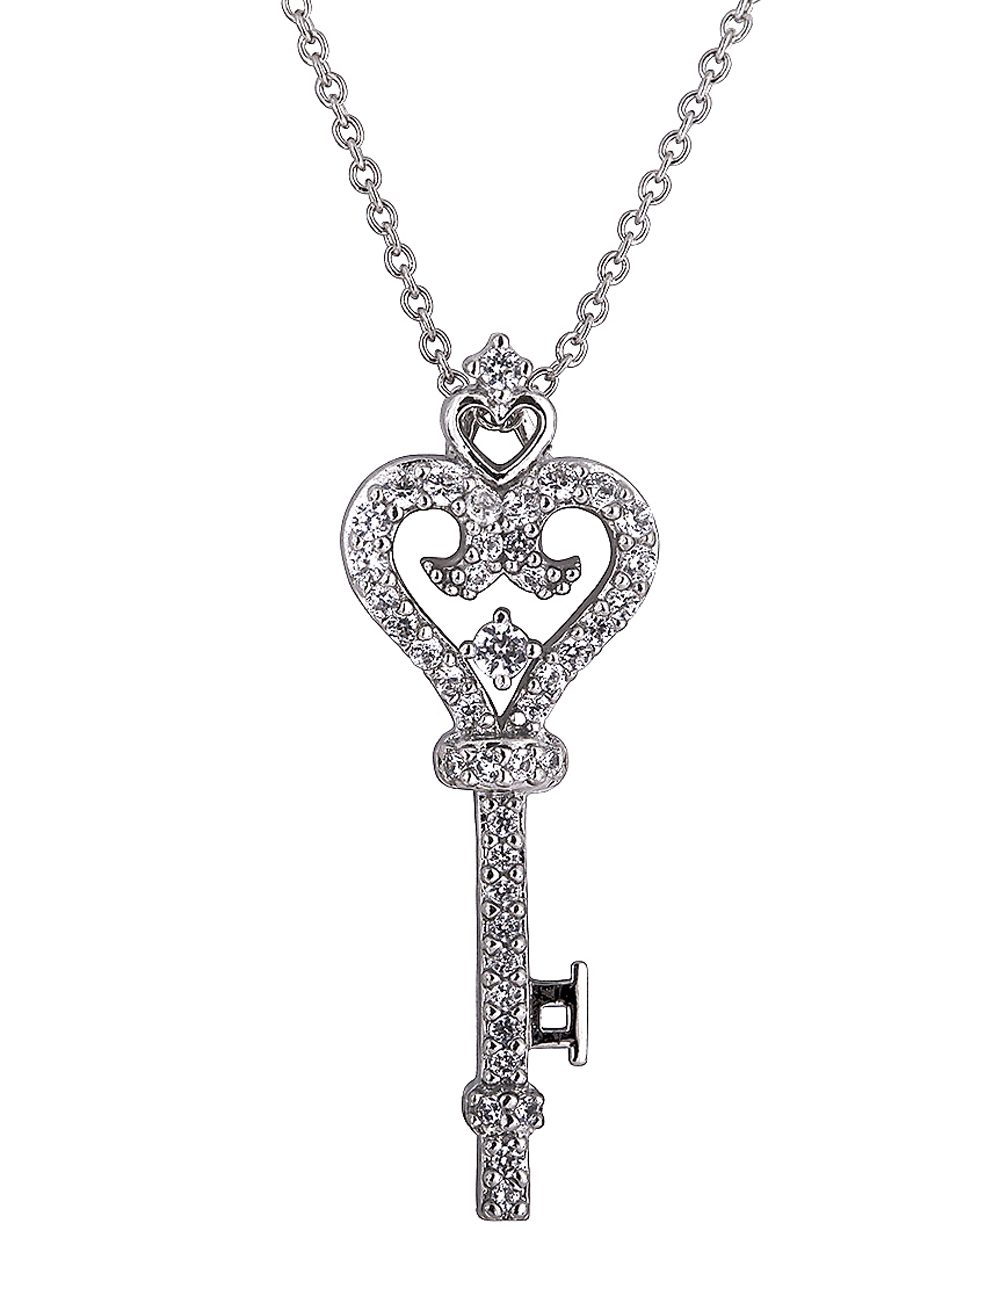 Key Pendant Necklace and Their Meaning